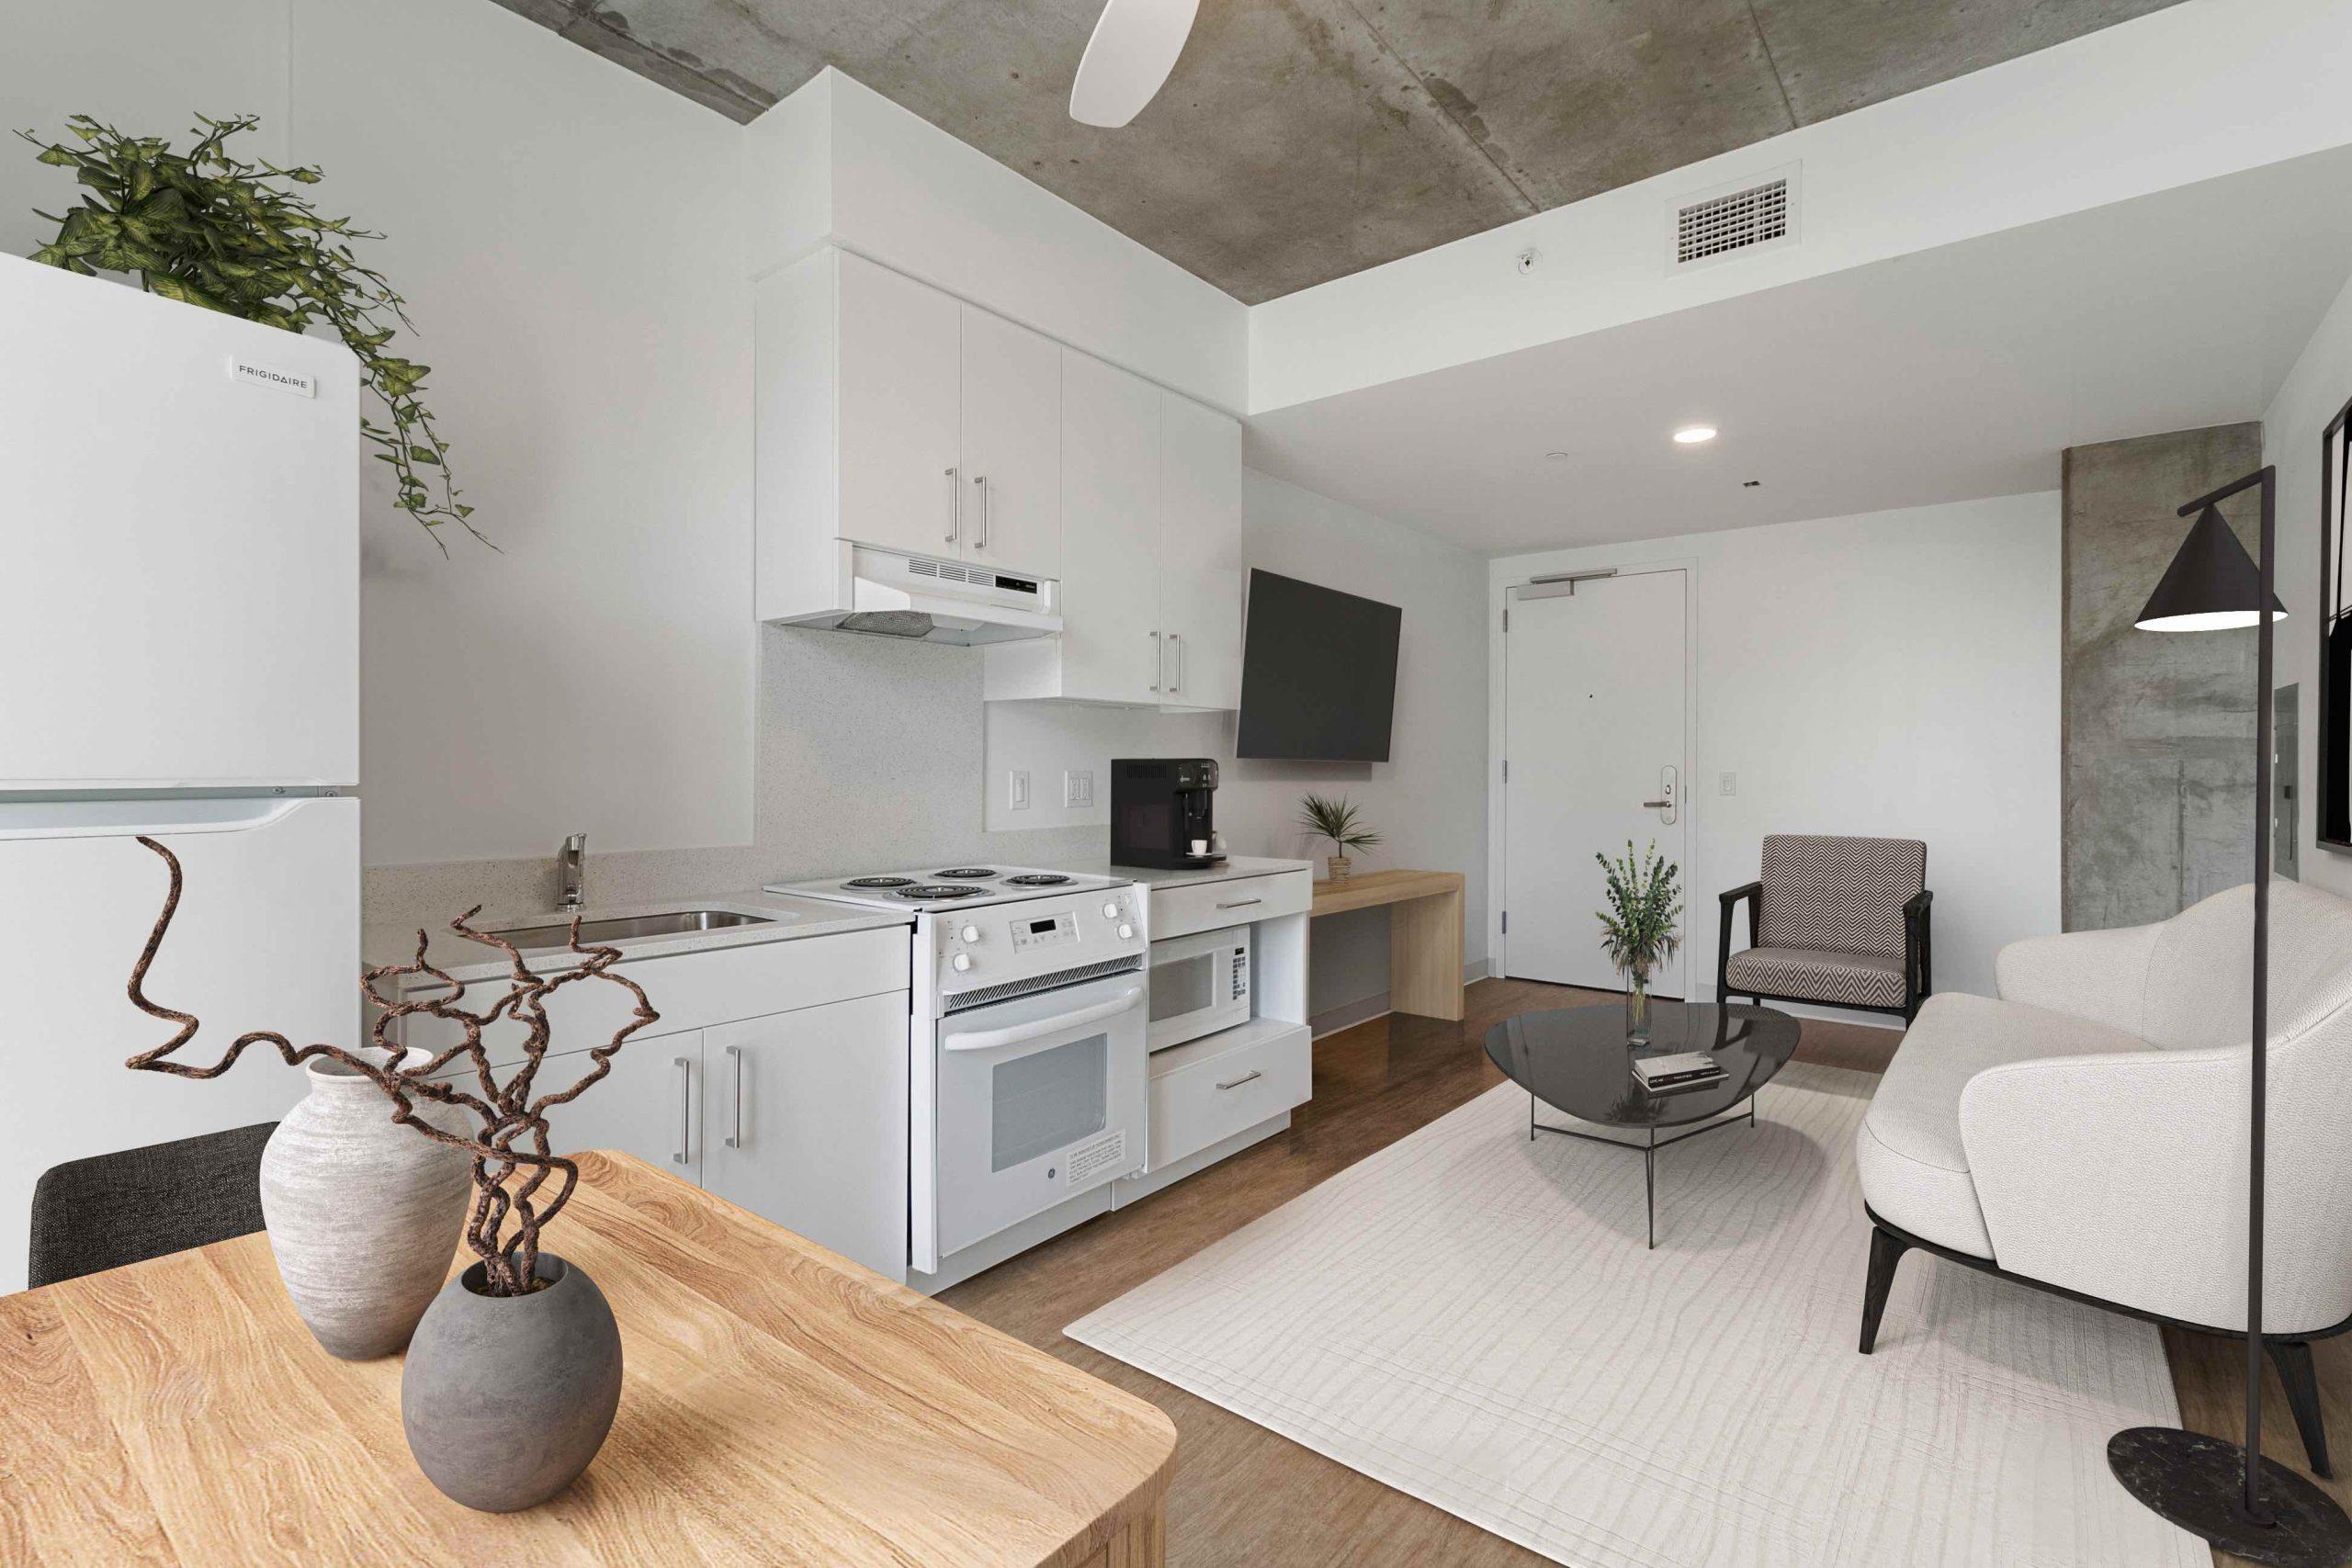 Academe 198 luxury apartments in San Francisco interior view of a 1-bedroom apartment